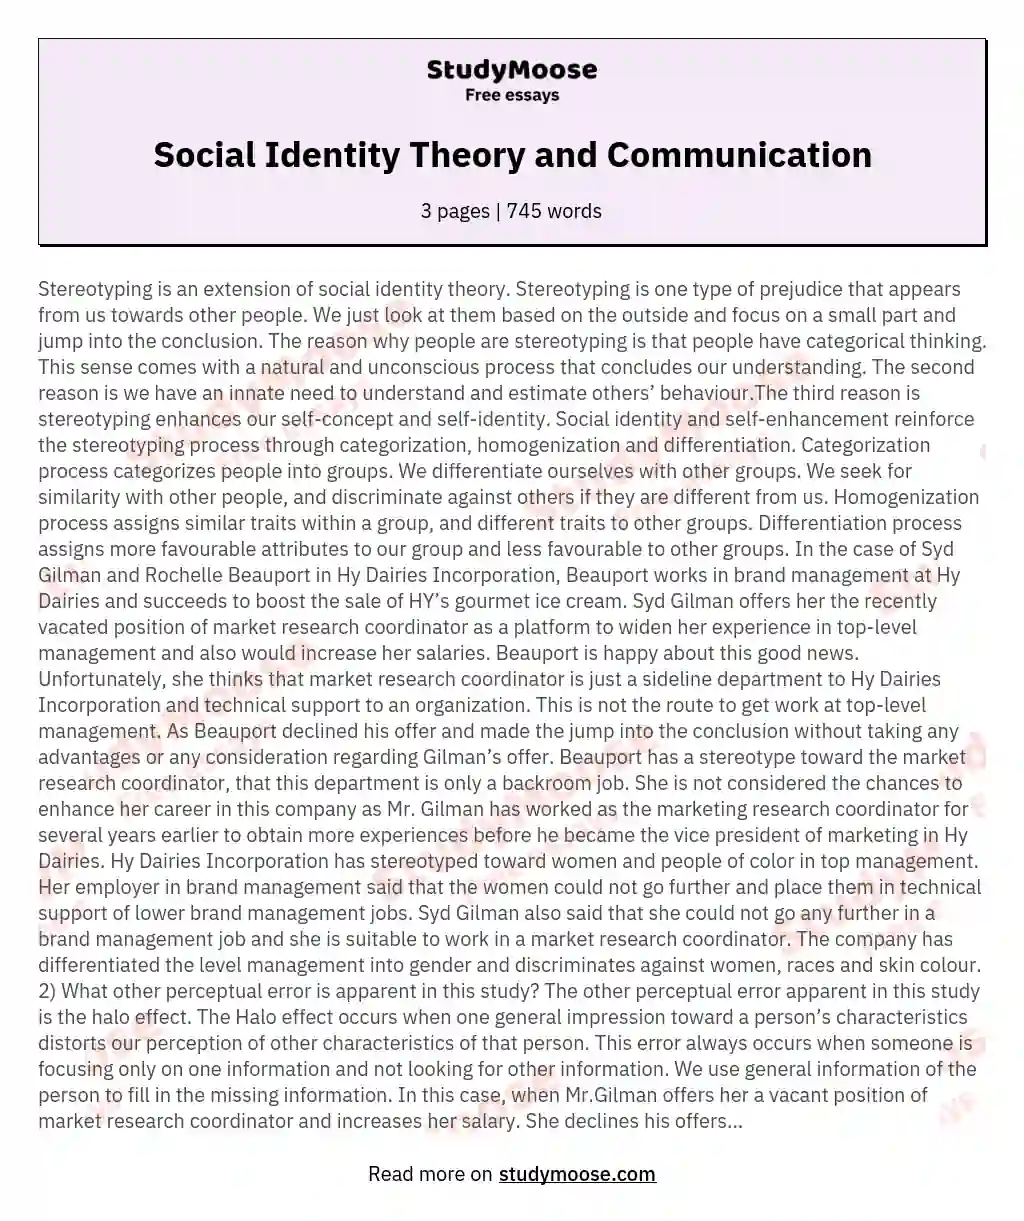 Social Identity Theory and Communication essay